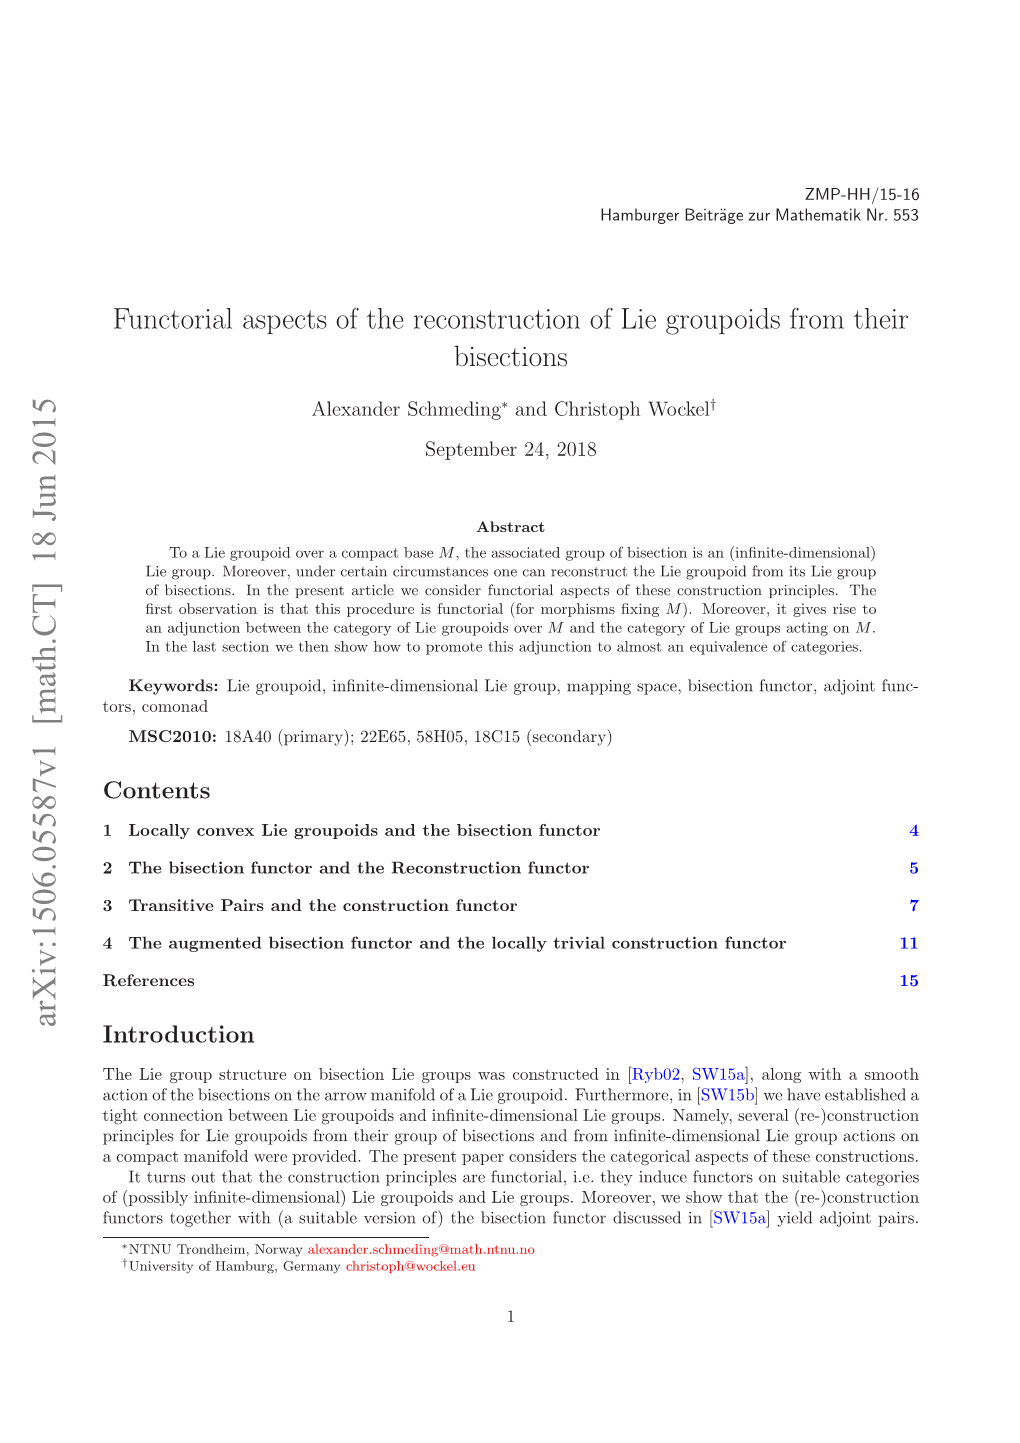 Functorial Aspects of the Reconstruction of Lie Groupoids From